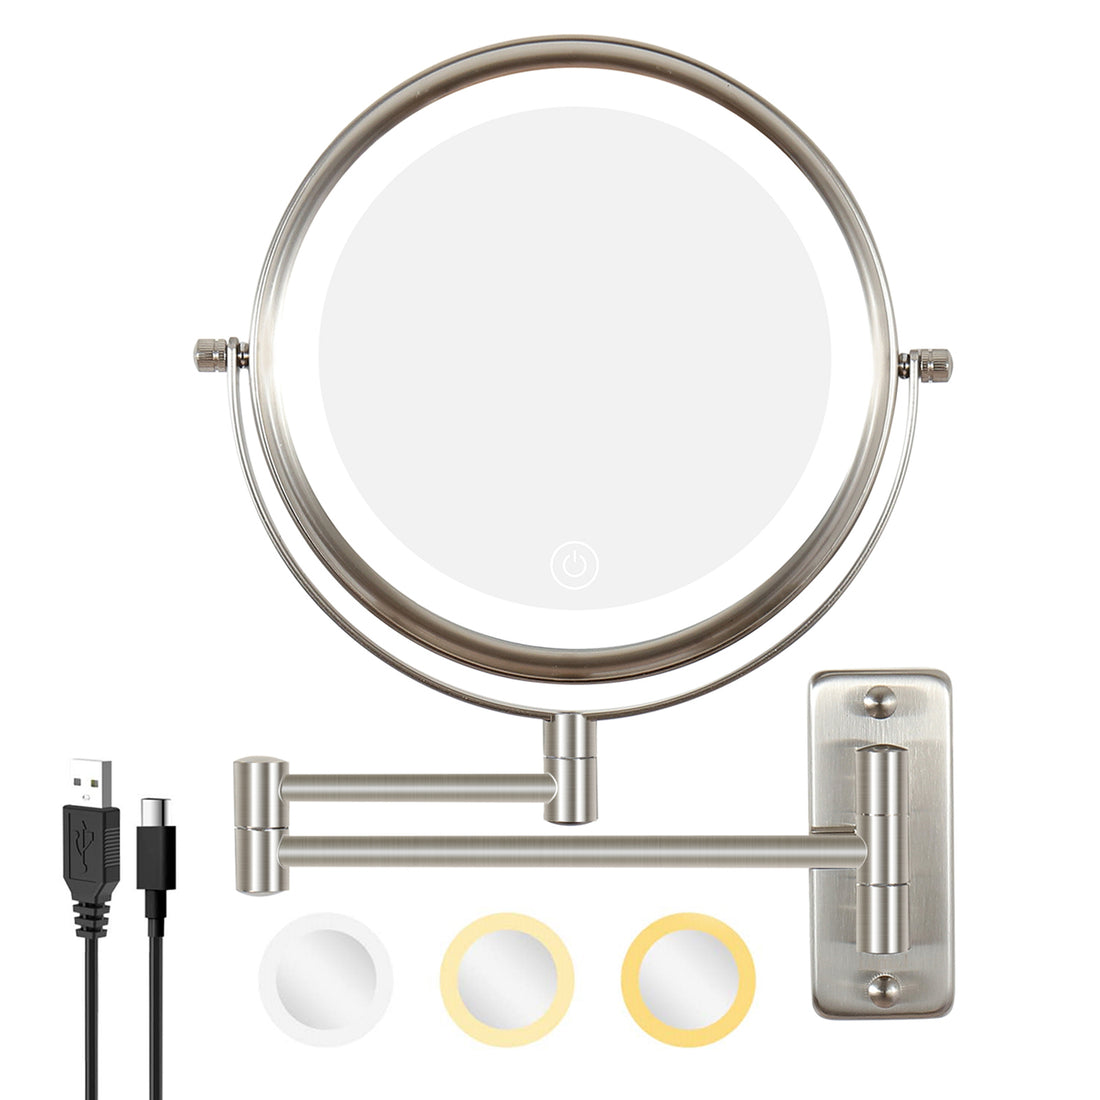 8 Inch Wall Mounted Makeup Mirror, Double Sided 1x 10x brushed nickel-metal